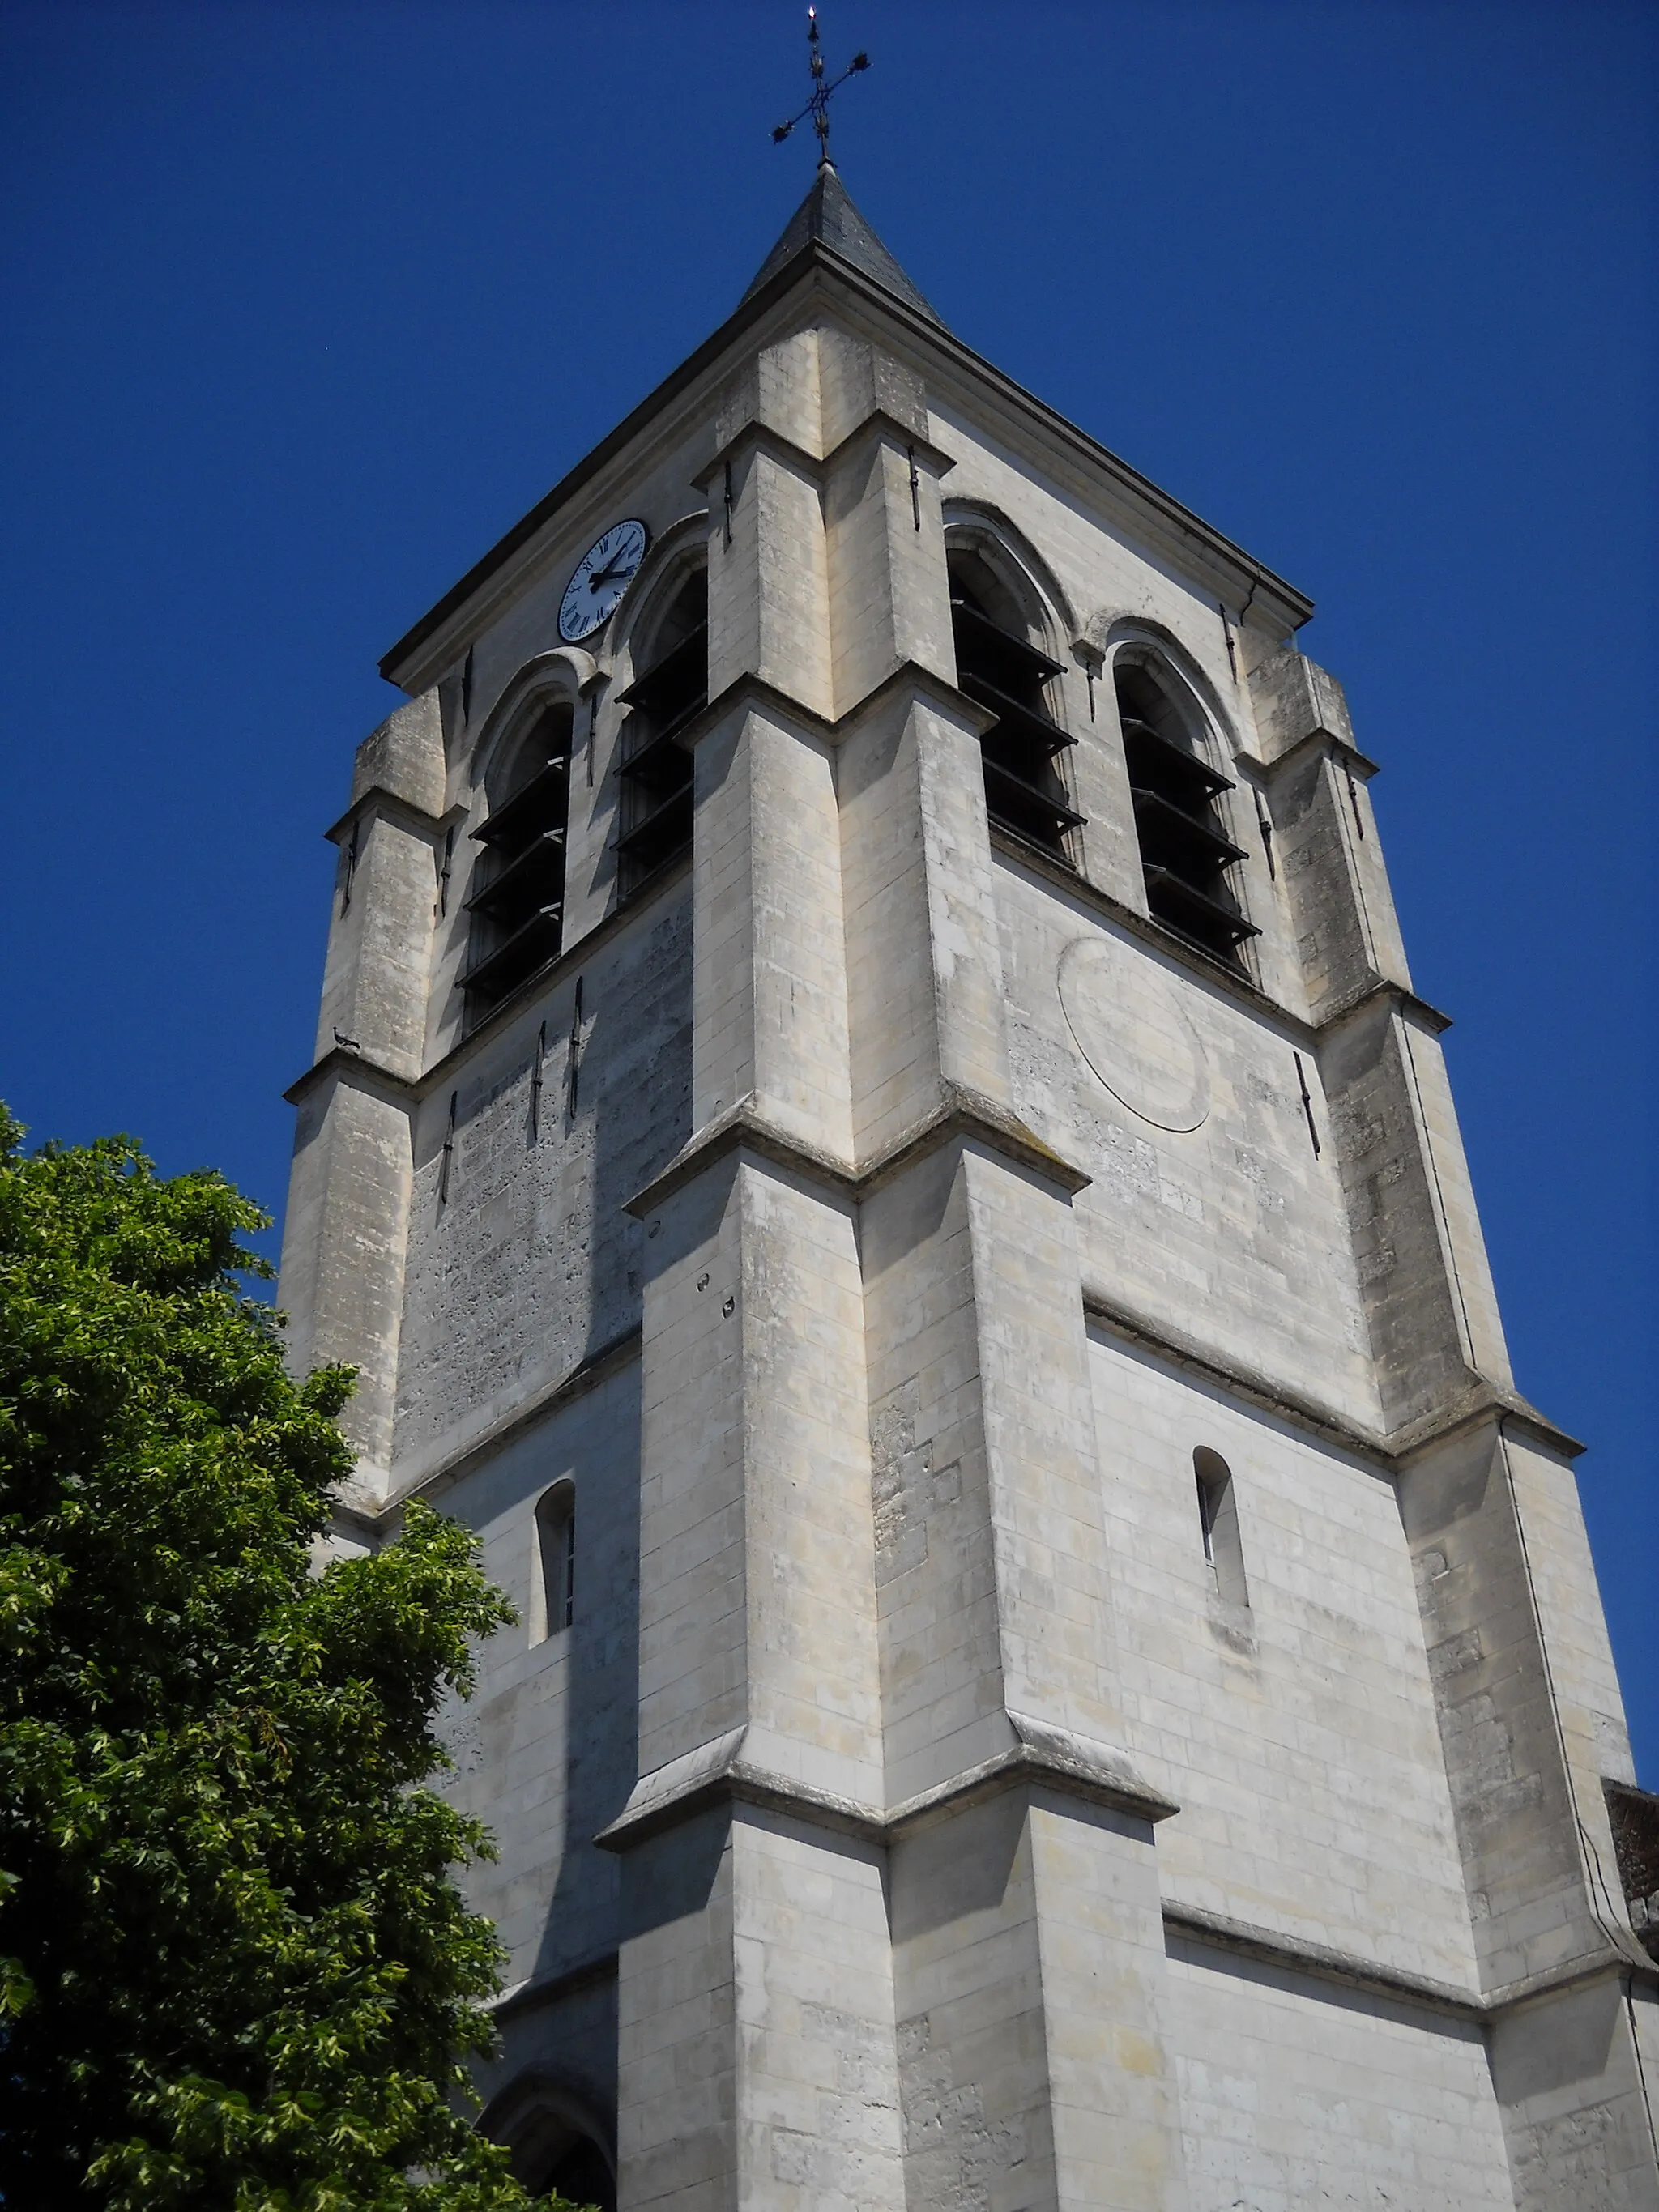 Photo showing: The church of Camphin-en-Carembault, Nord, France.